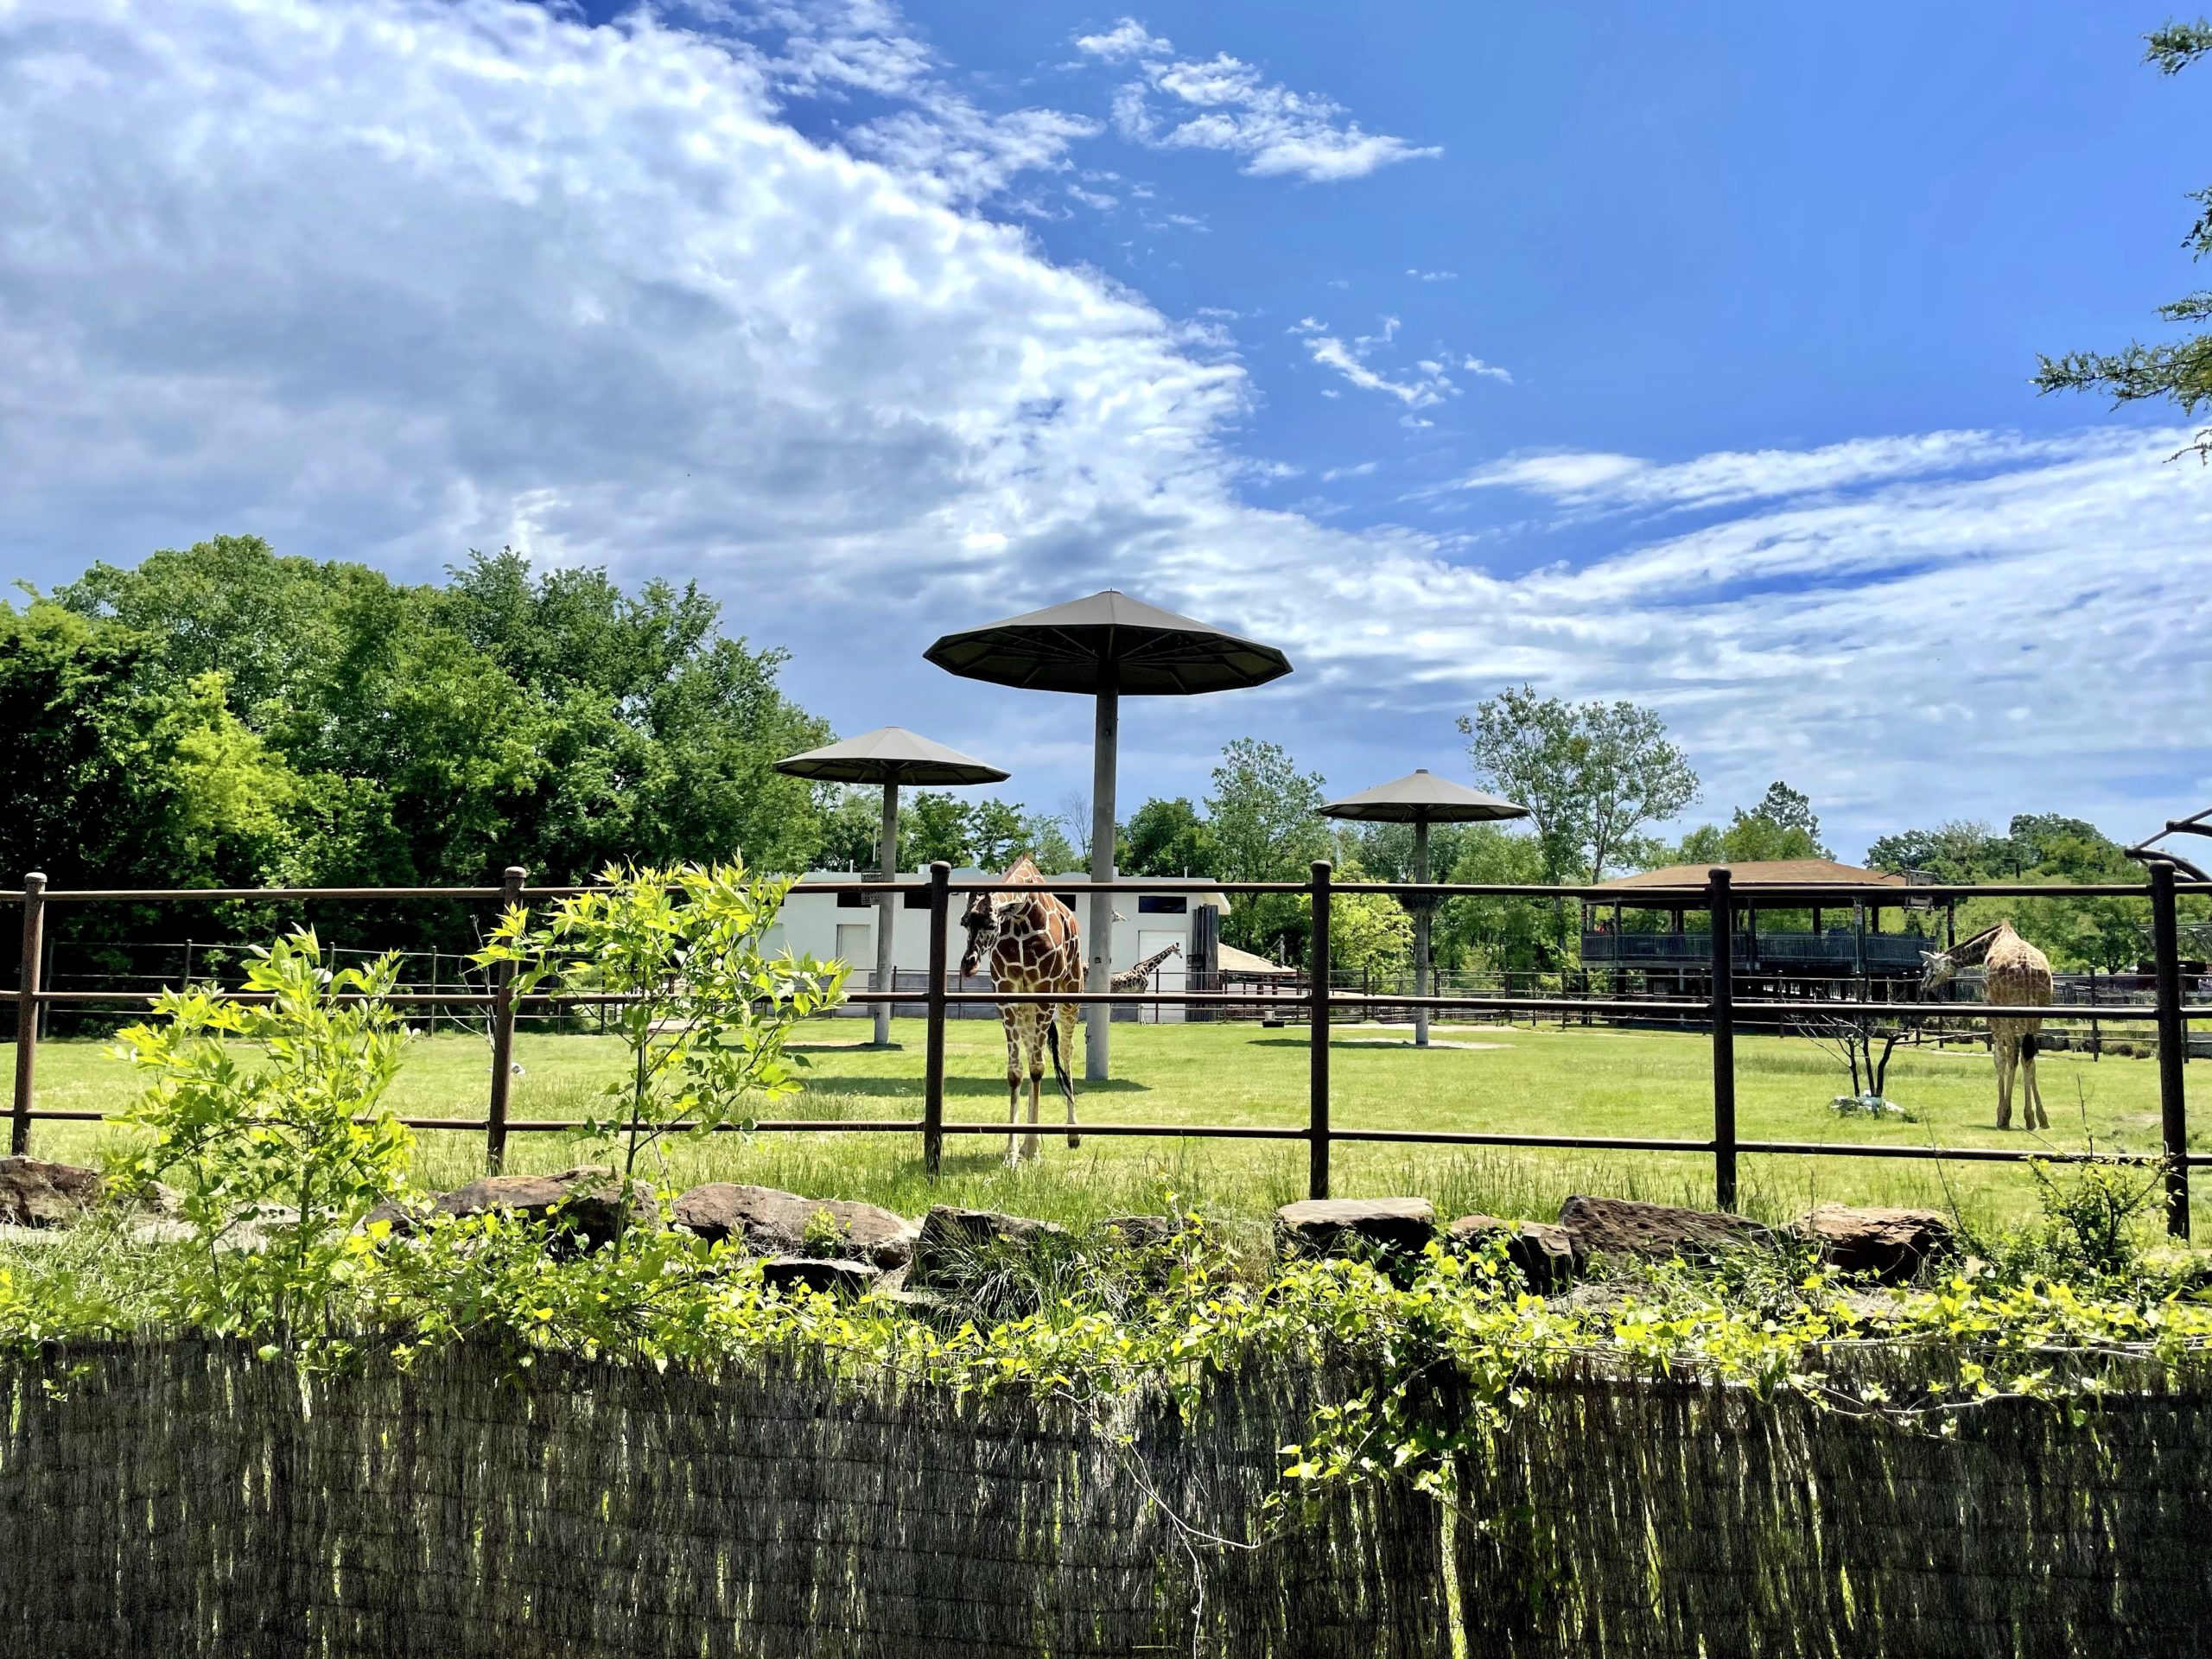 Family Fun at the Tulsa Zoo in One Day – The Must See Attractions with Kids